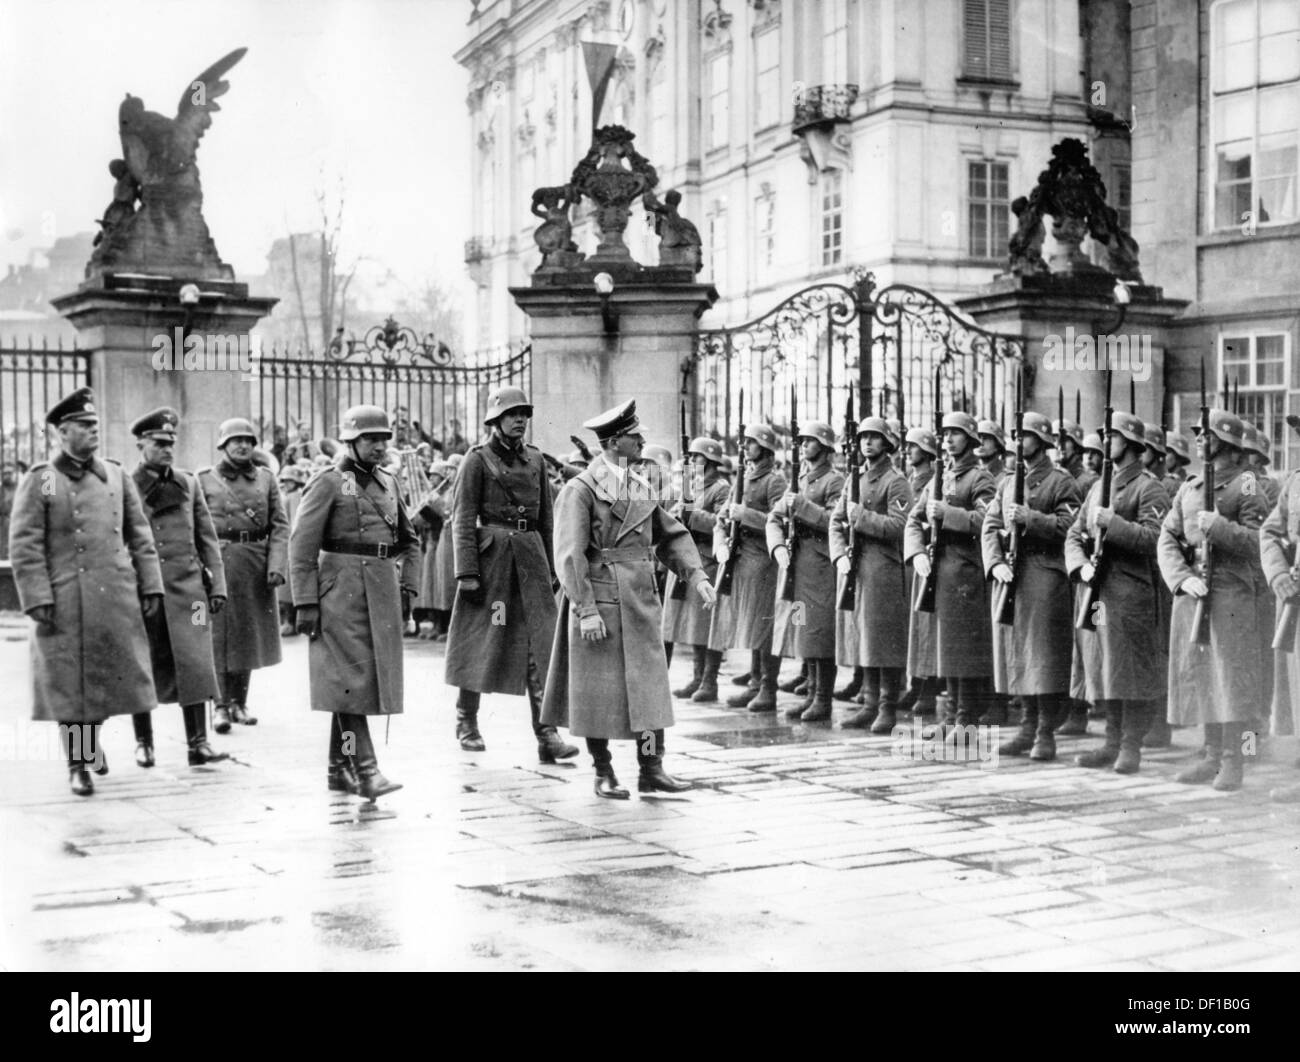 The image from the Nazi Propaganda! shows Adolf Hitler marching past an honorary company in the Castle District in Prague, Czech Republic, after the invasion of the so-called 'Remainder of Czechia' by the German Wehrmacht , on 16 March 1939. From here, he announced the establishment of the 'Protectorate of Bohemia and Moravia', which meant the dissolution of Czechoslovakia as a sovereign state. Fotoarchiv für Zeitgeschichte Stock Photo